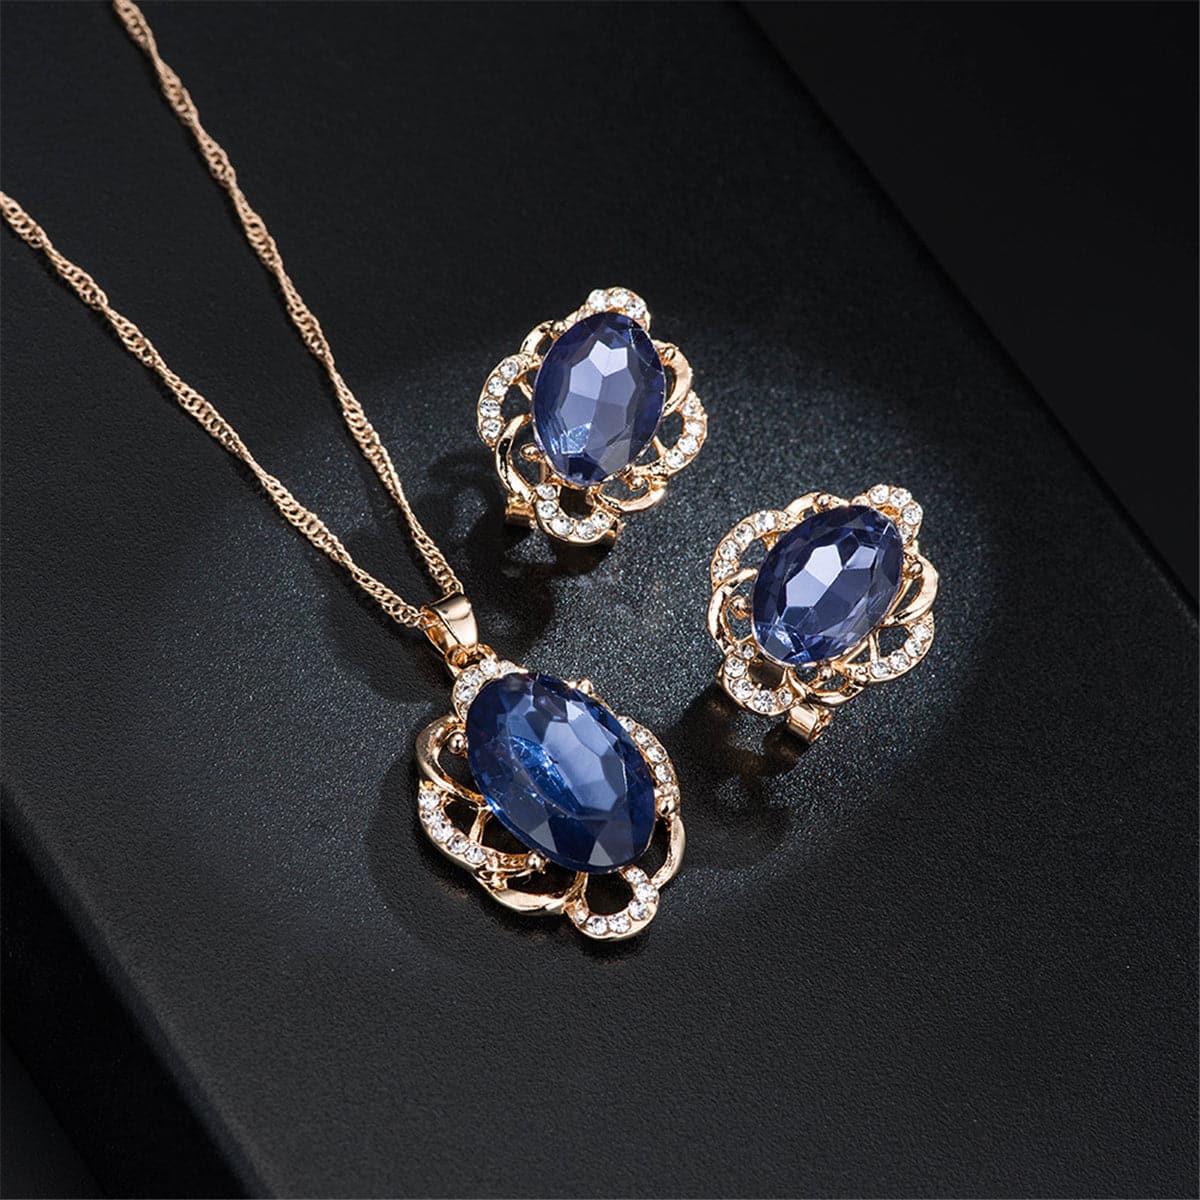 Blue & 18K Rose Gold-Plated Oval Pendant Necklace & Stud Earrings